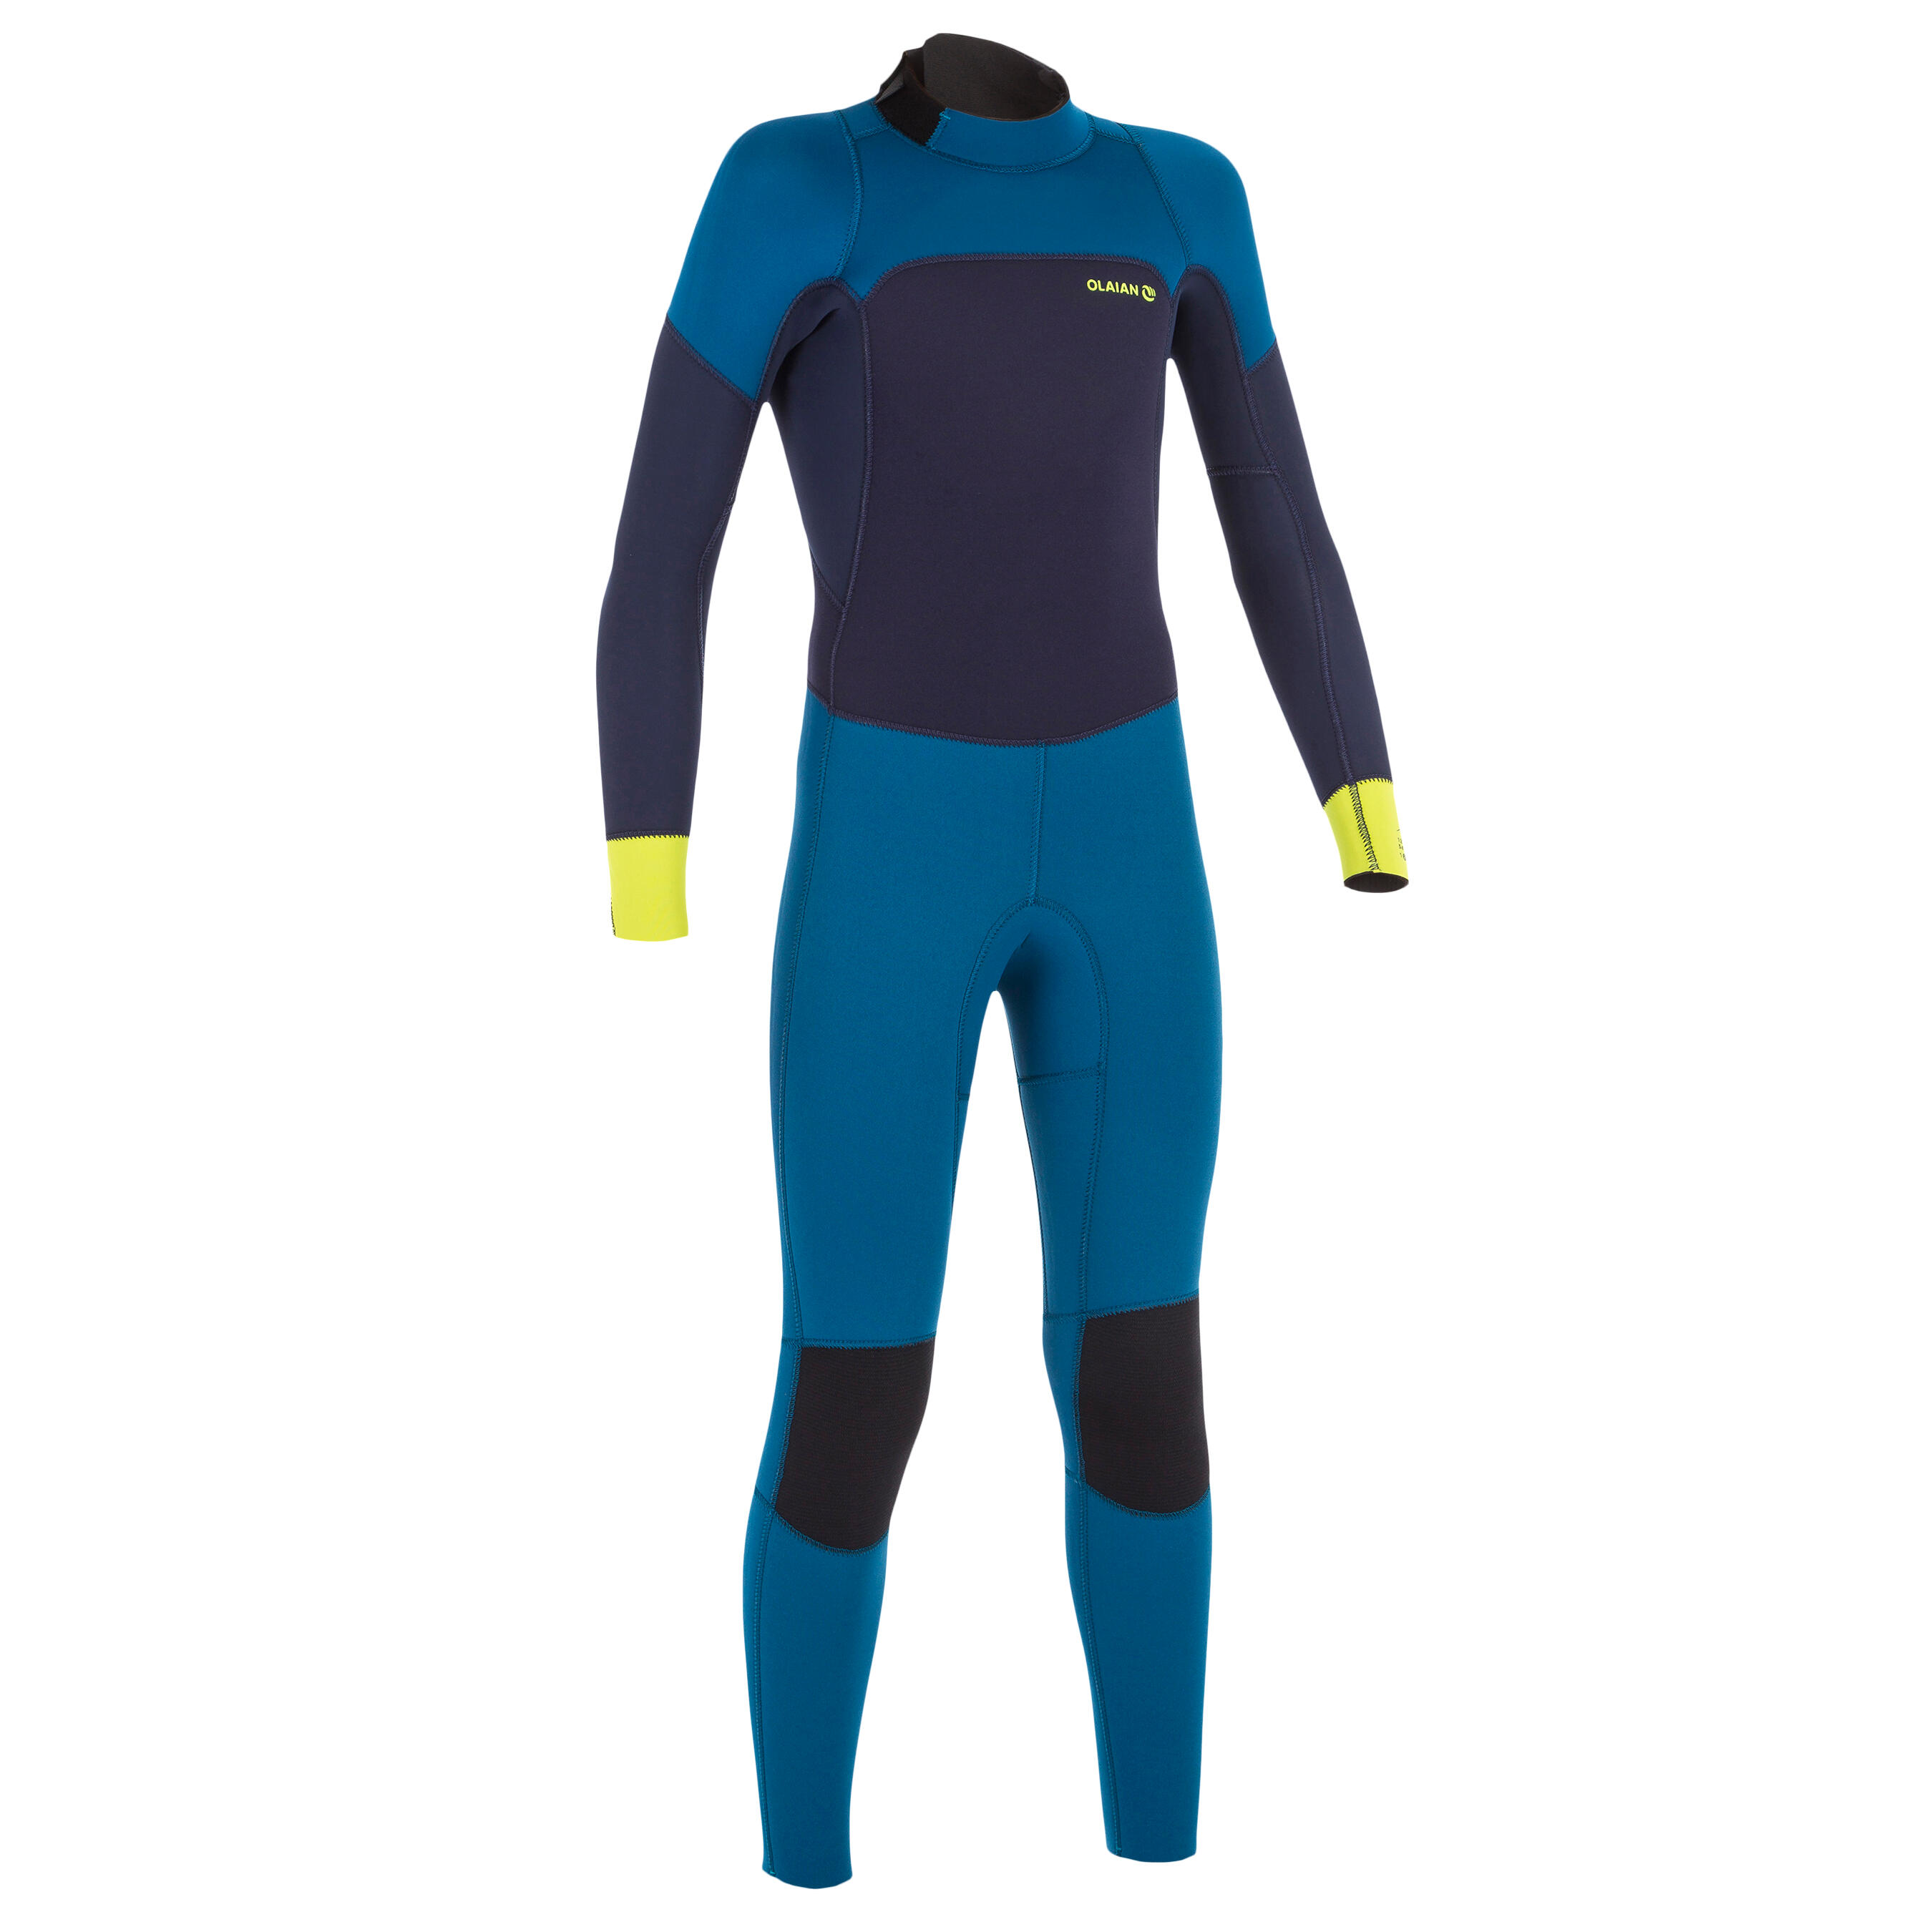 Child's surfing wetsuit 4/3 mm Neoprene - 500 CW Blue - OLAIAN